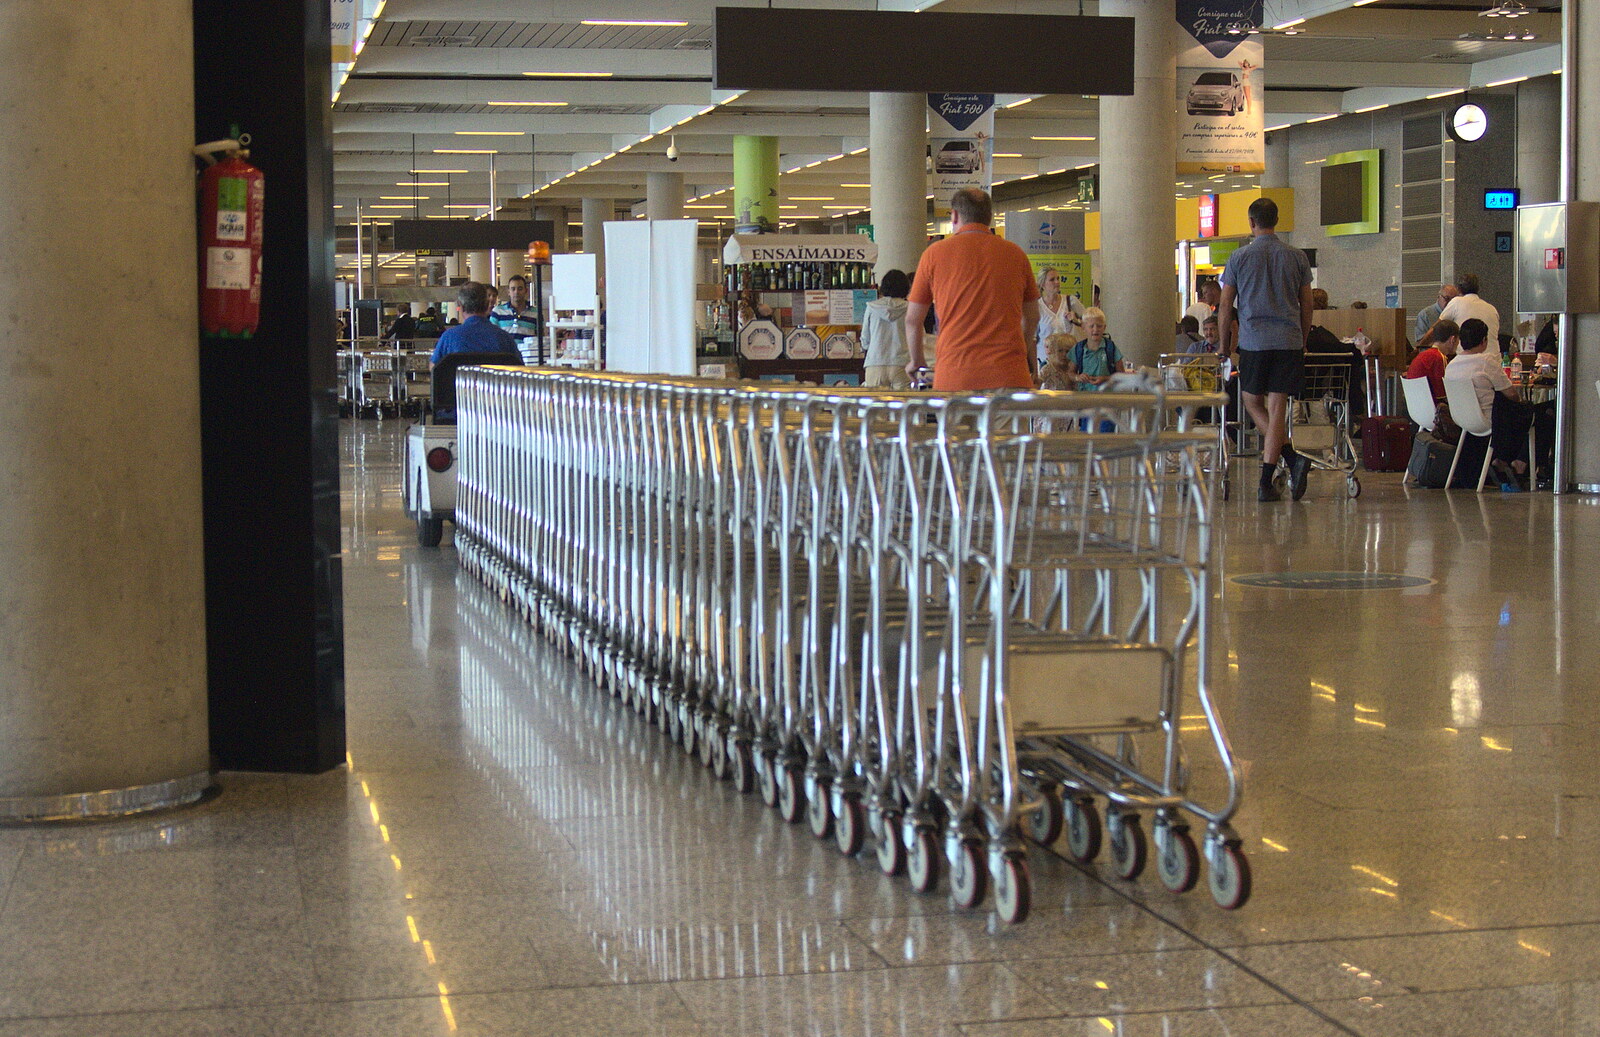 A line of trolleys trundles around from A Few Hours in Valdemossa, Mallorca, Spain - 13th September 2012